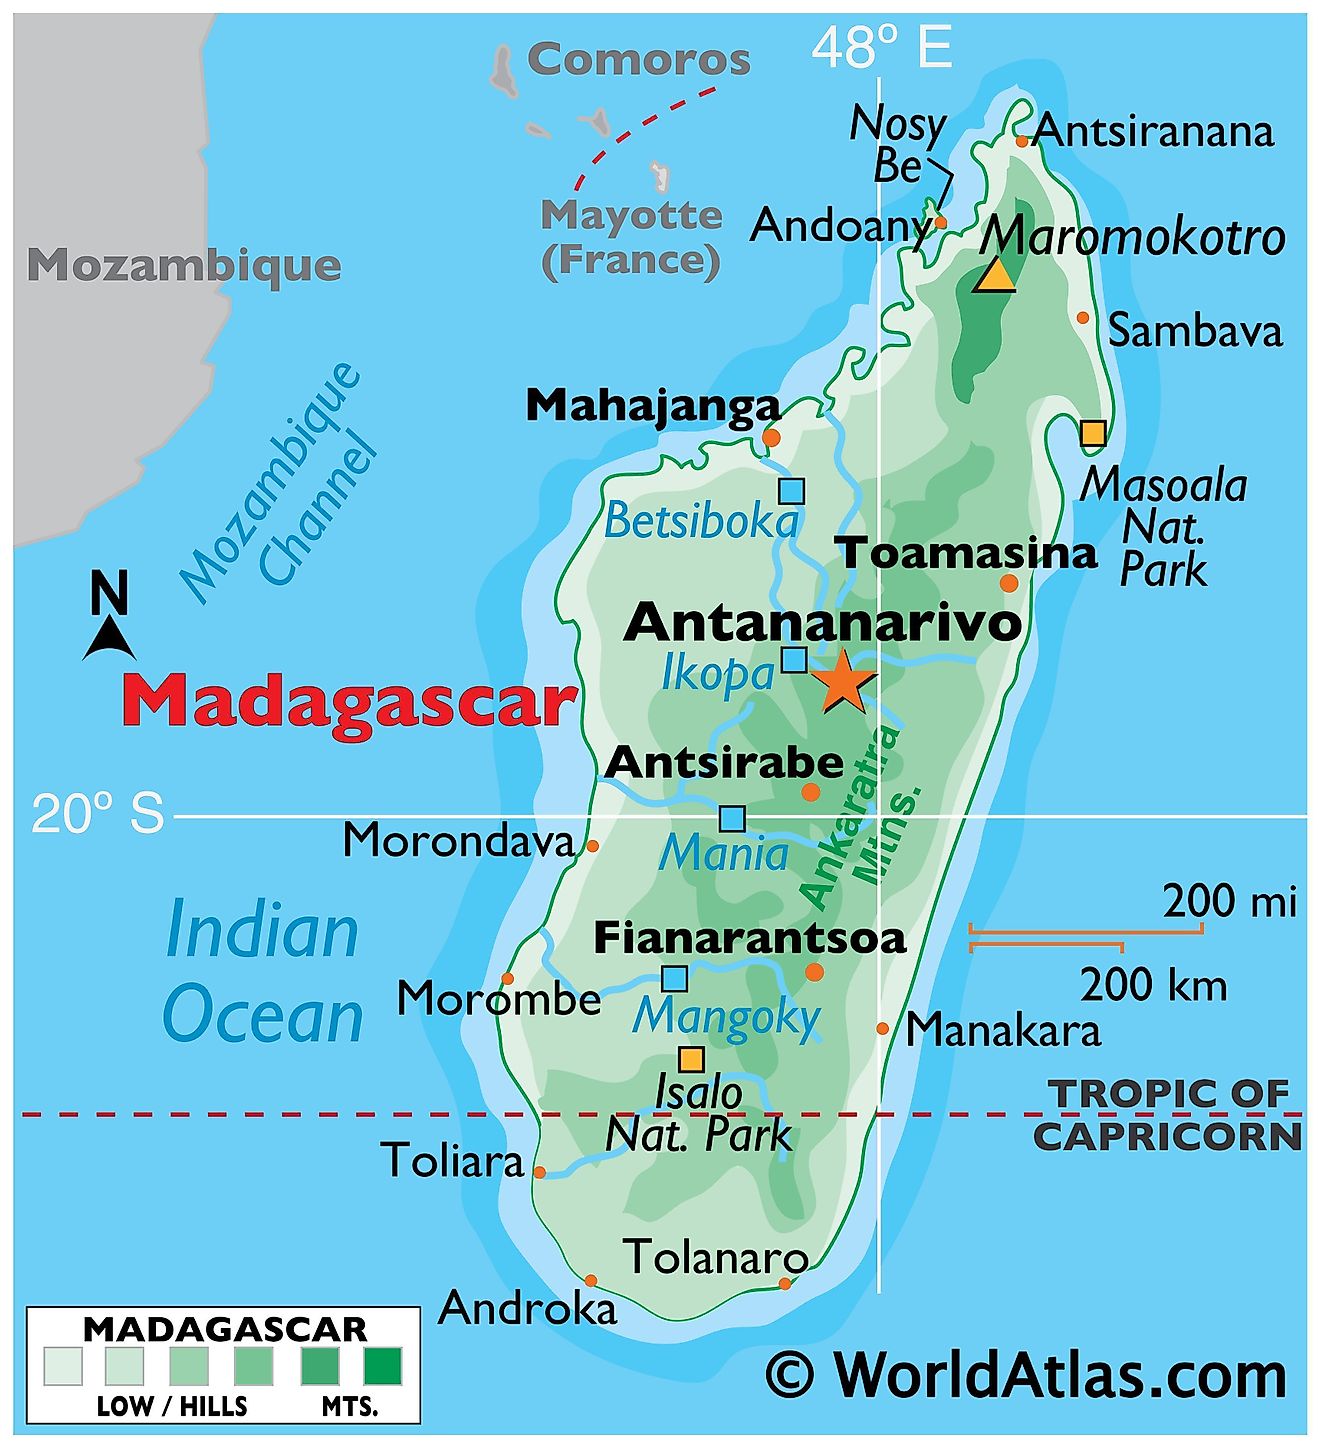 Physical map of Madagascar showing state boundaries, relief, highest point, important cities and major rivers.